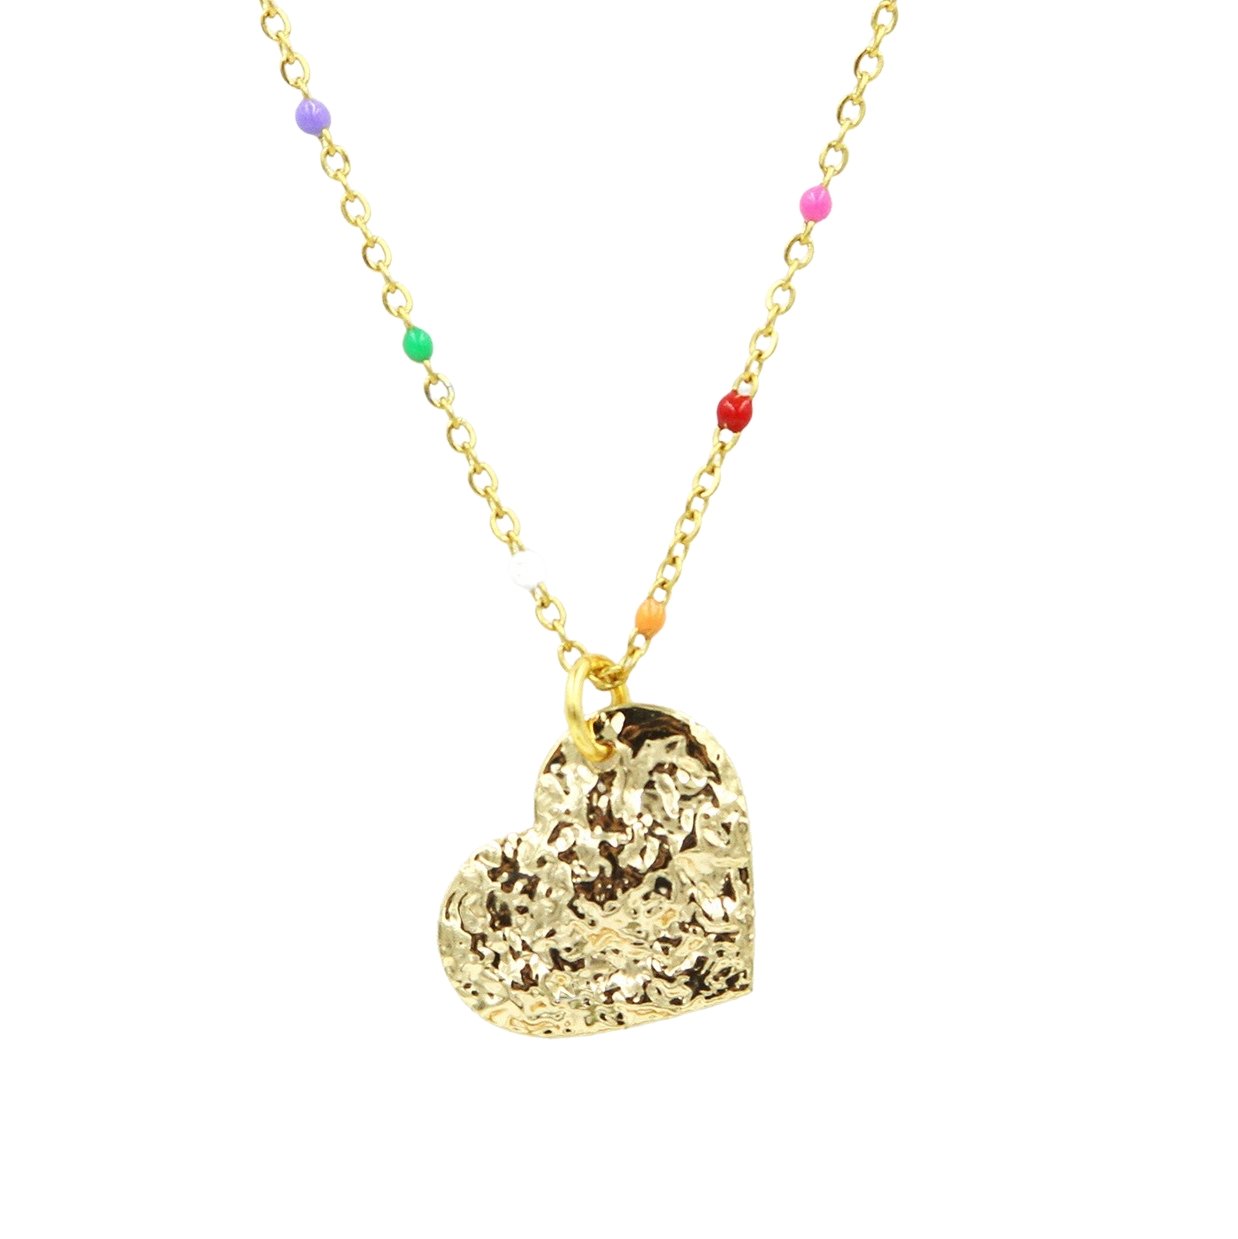 Heart Chakra Confetti Chain Necklace - Sunday Girl by Amy DiLamarraNecklace